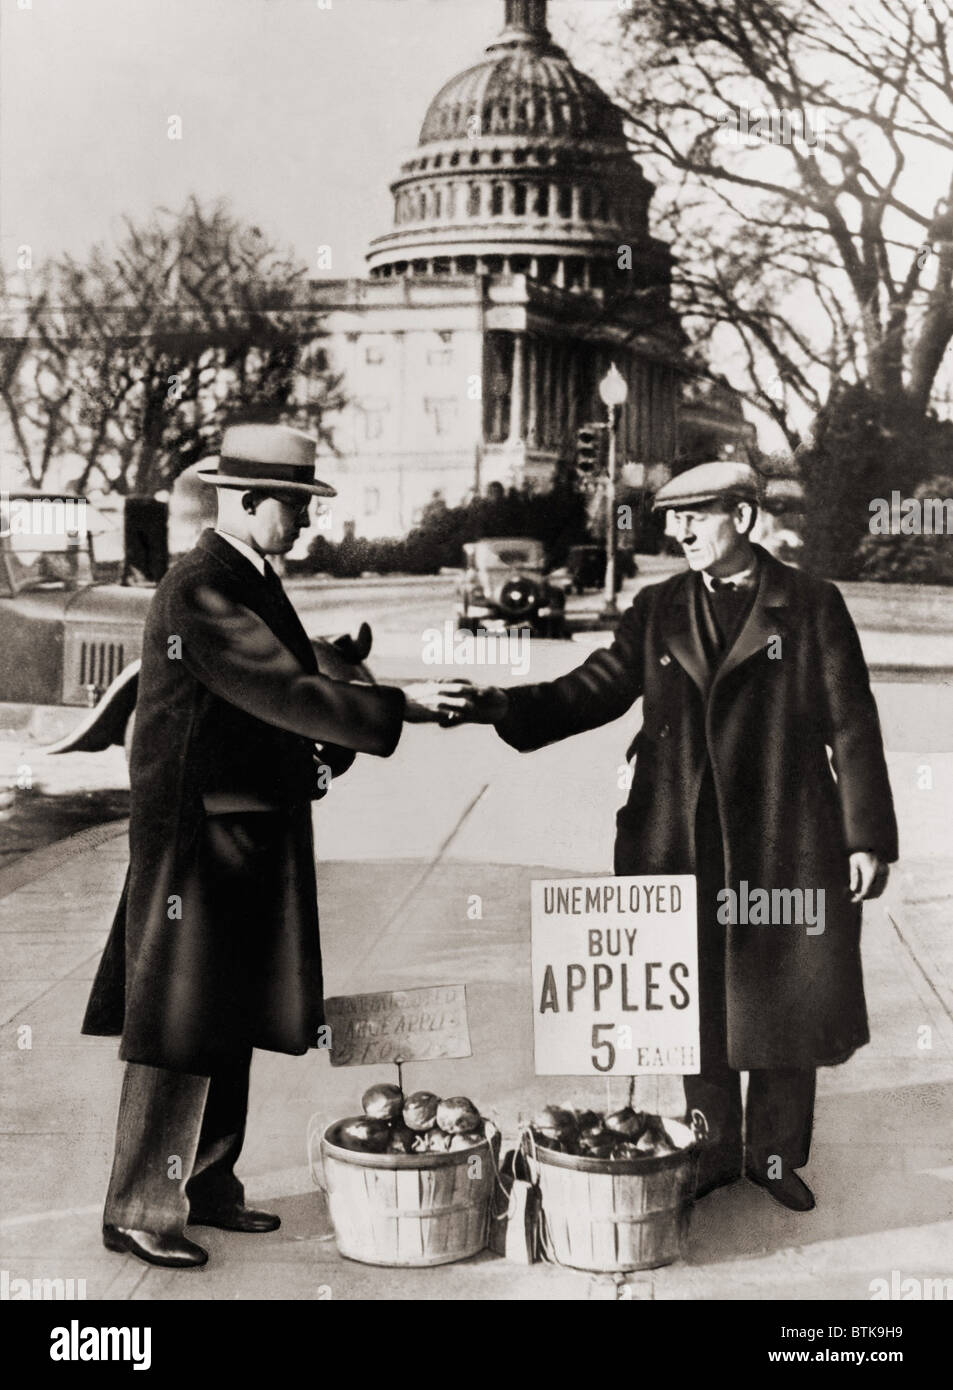 The Great Depression. Unemployed man sells apples near the Capitol in Washington D.C. As the Great Depression deepened in 1930, unemployed men obtained apples from the International Apple Shippers Association, to sell on the streets. 1930 Stock Photo